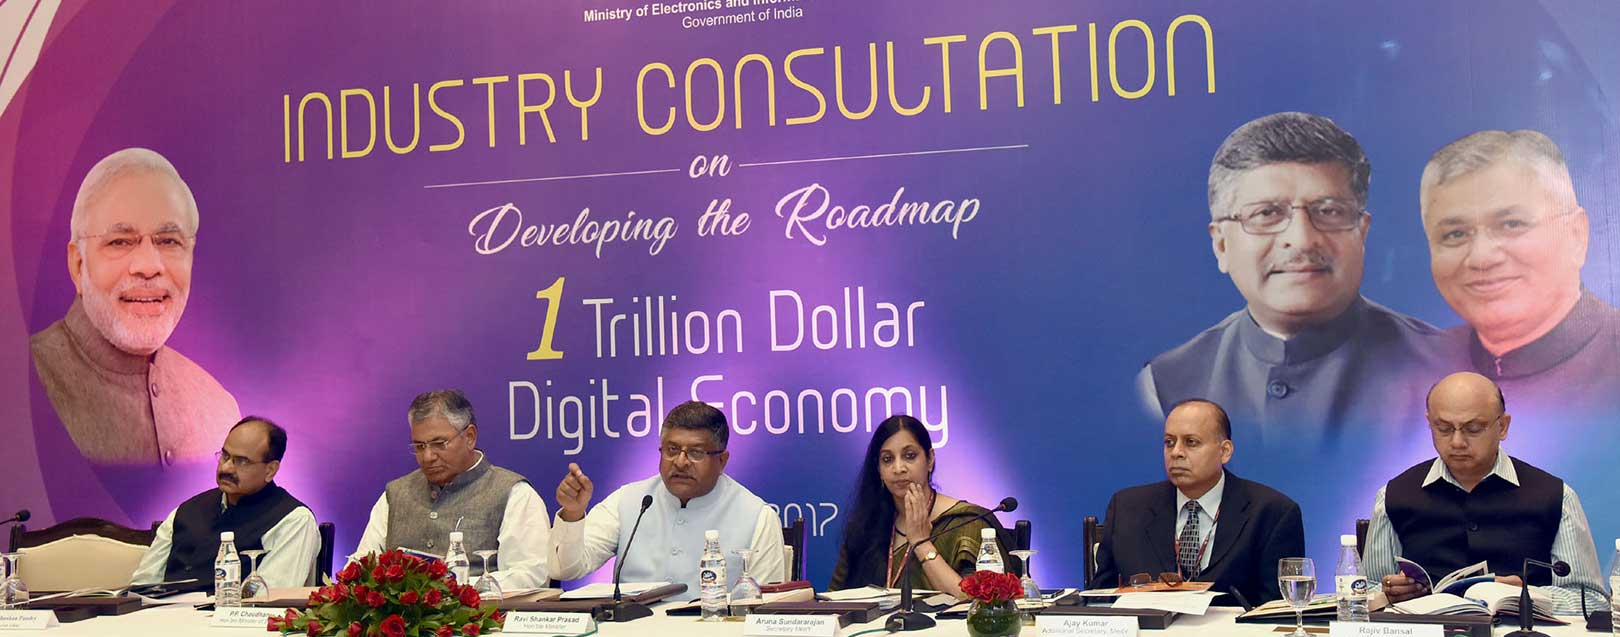 ‘Achieving $1 trillion digital economy is not a tall claim. Why wait for 7 years? Can we do it in 3-4 yrs?’ Prasad